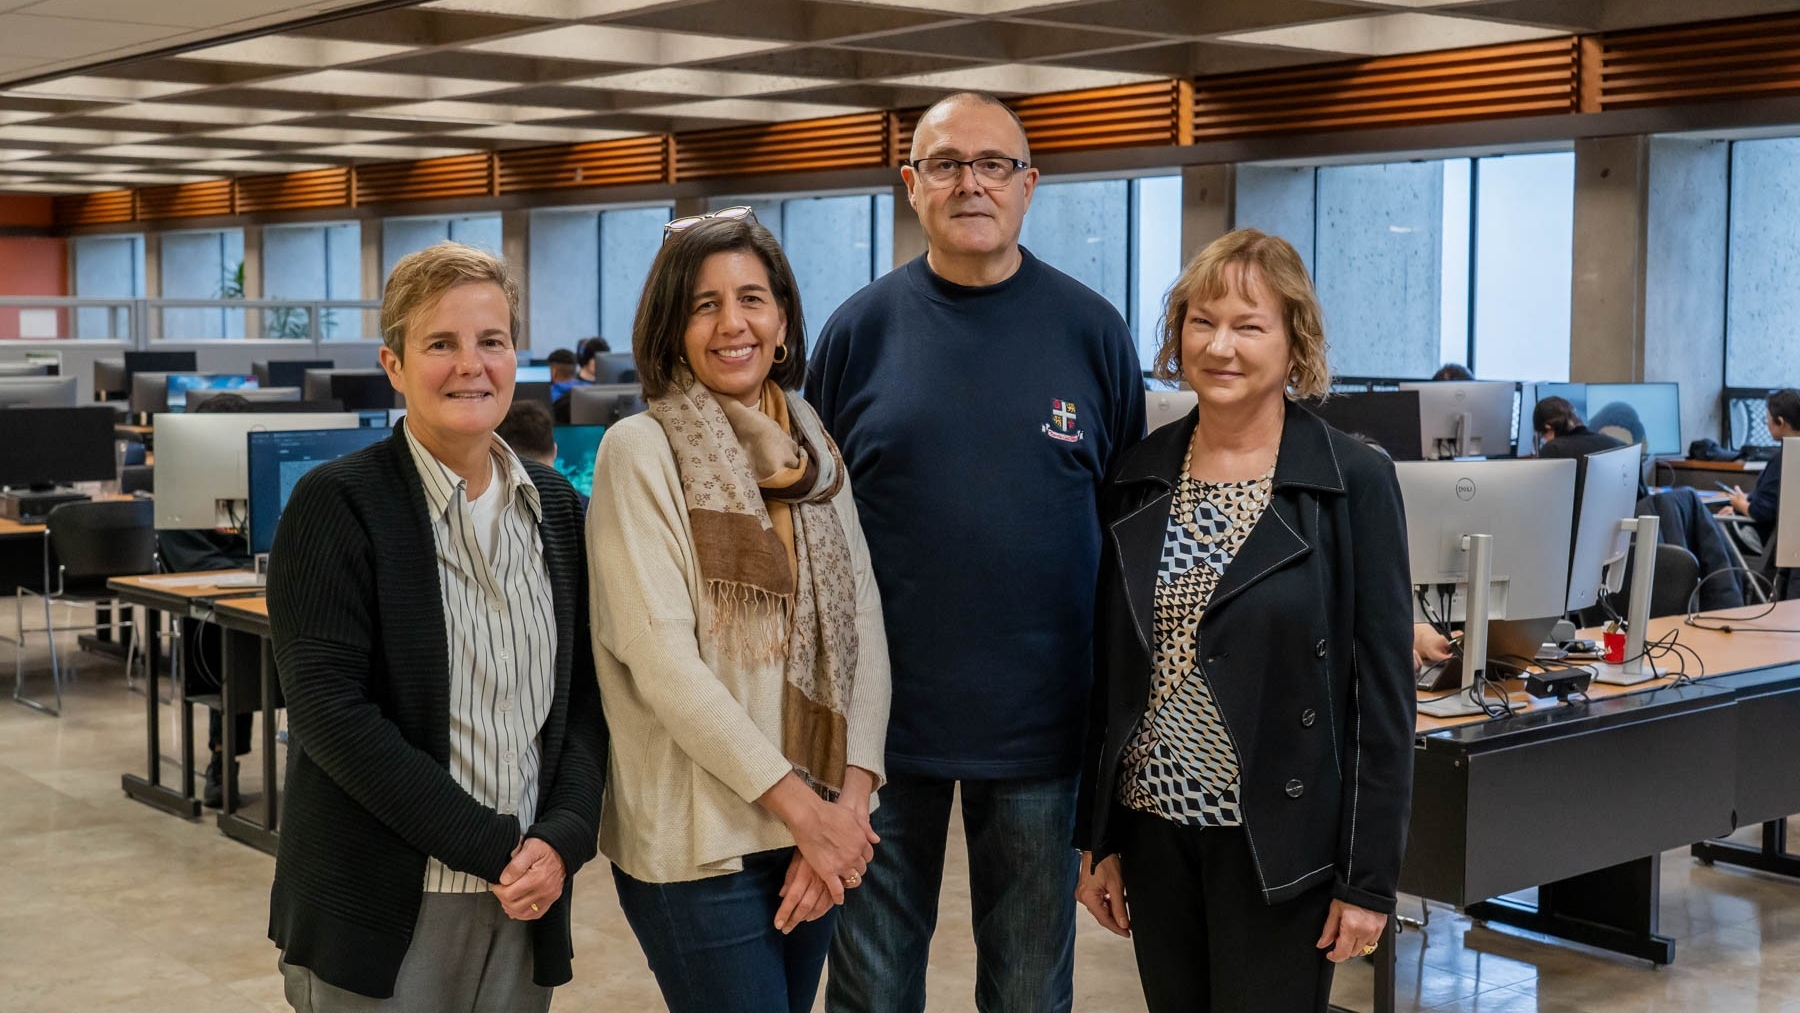 Four people (Gwen Bird, Melek Ortabasi, Malcolm Toms, Natalie Gick) standing together posing in SFU Bennett Library.